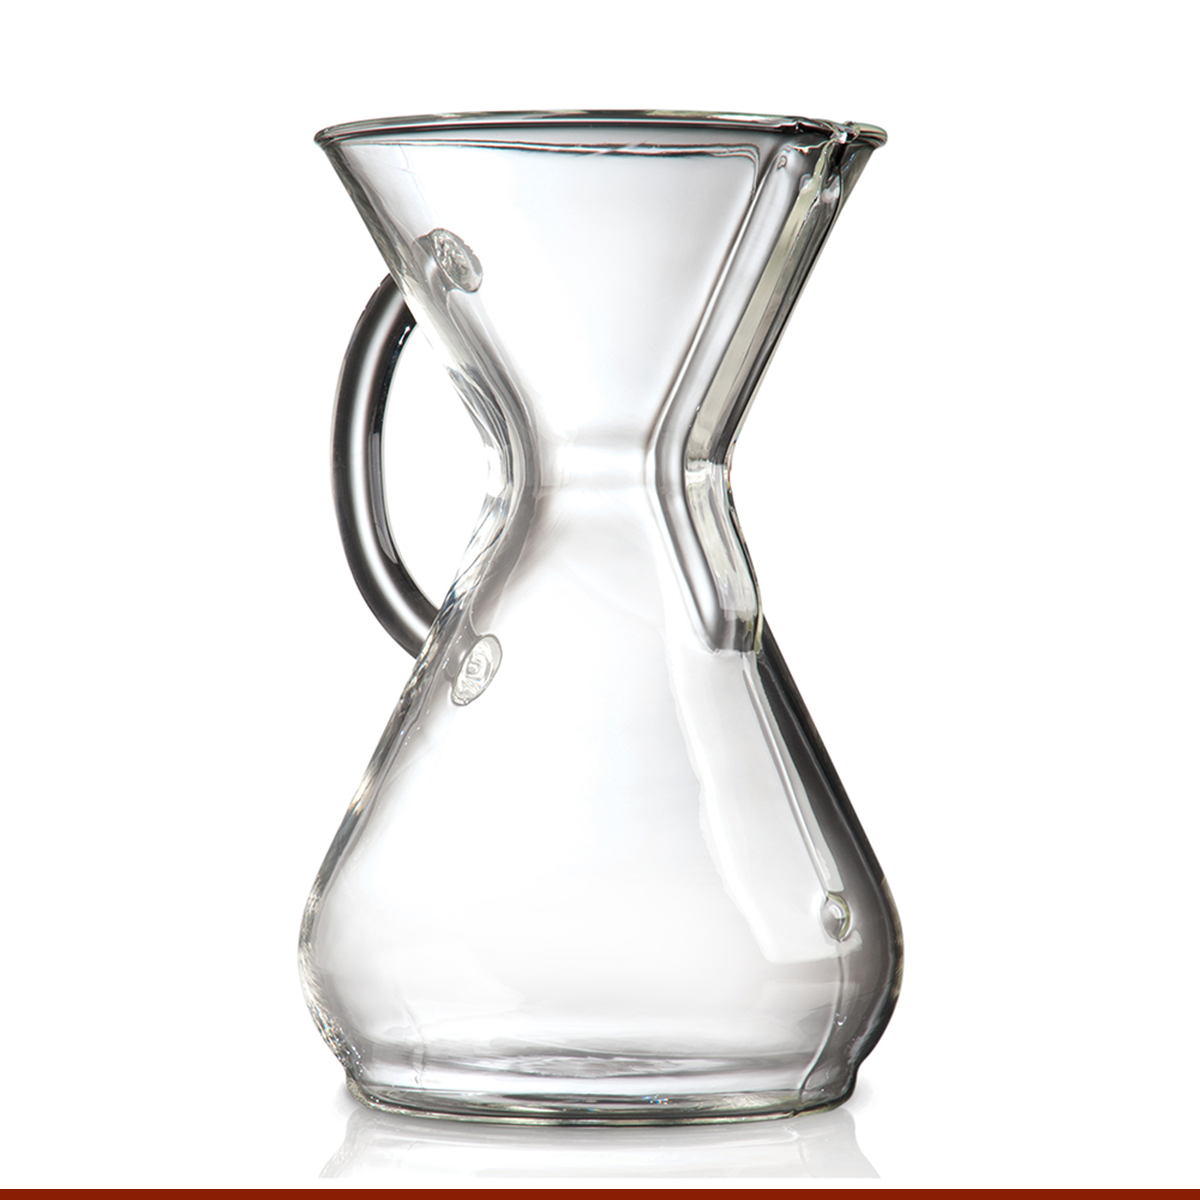 https://store.chemexcoffeemaker.com/media/catalog/product/c/h/chemex-glasshandle-8cup-detail_1.png